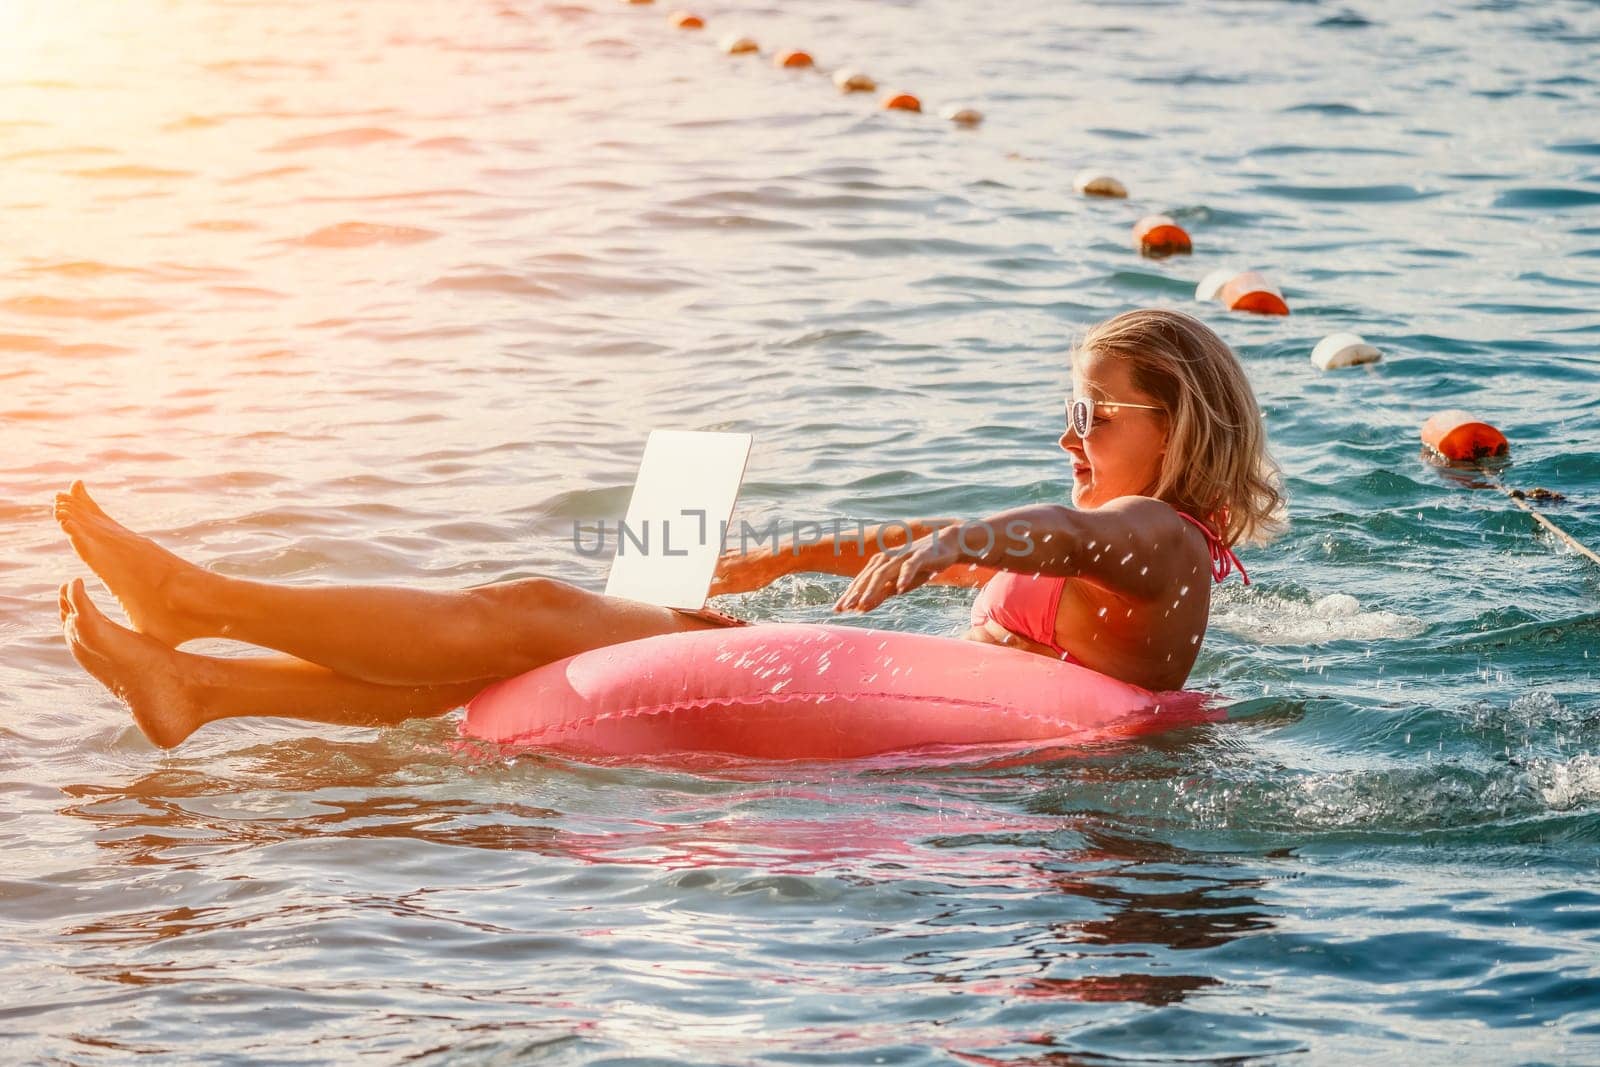 Woman works on laptop in sea. Freelancer, young blond woman in sunglases floating on an inflatable big pink donut with a laptop in the sea at sunset. Freelance, travel and holidays concept